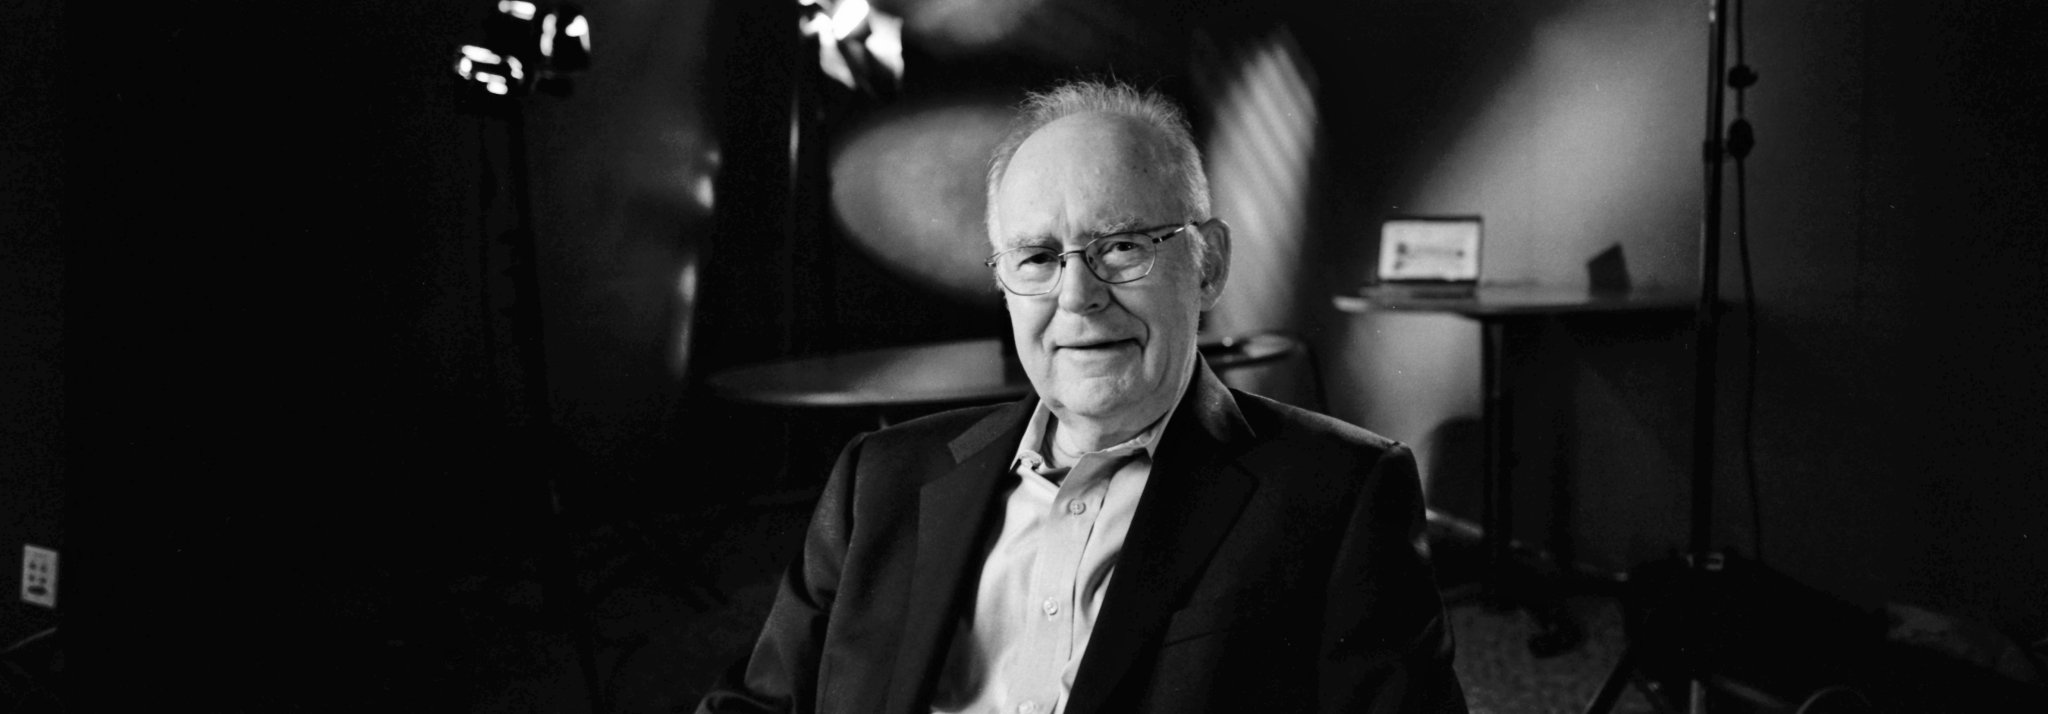 Intel Co-Founder Gordon Moore Dies at Age 94